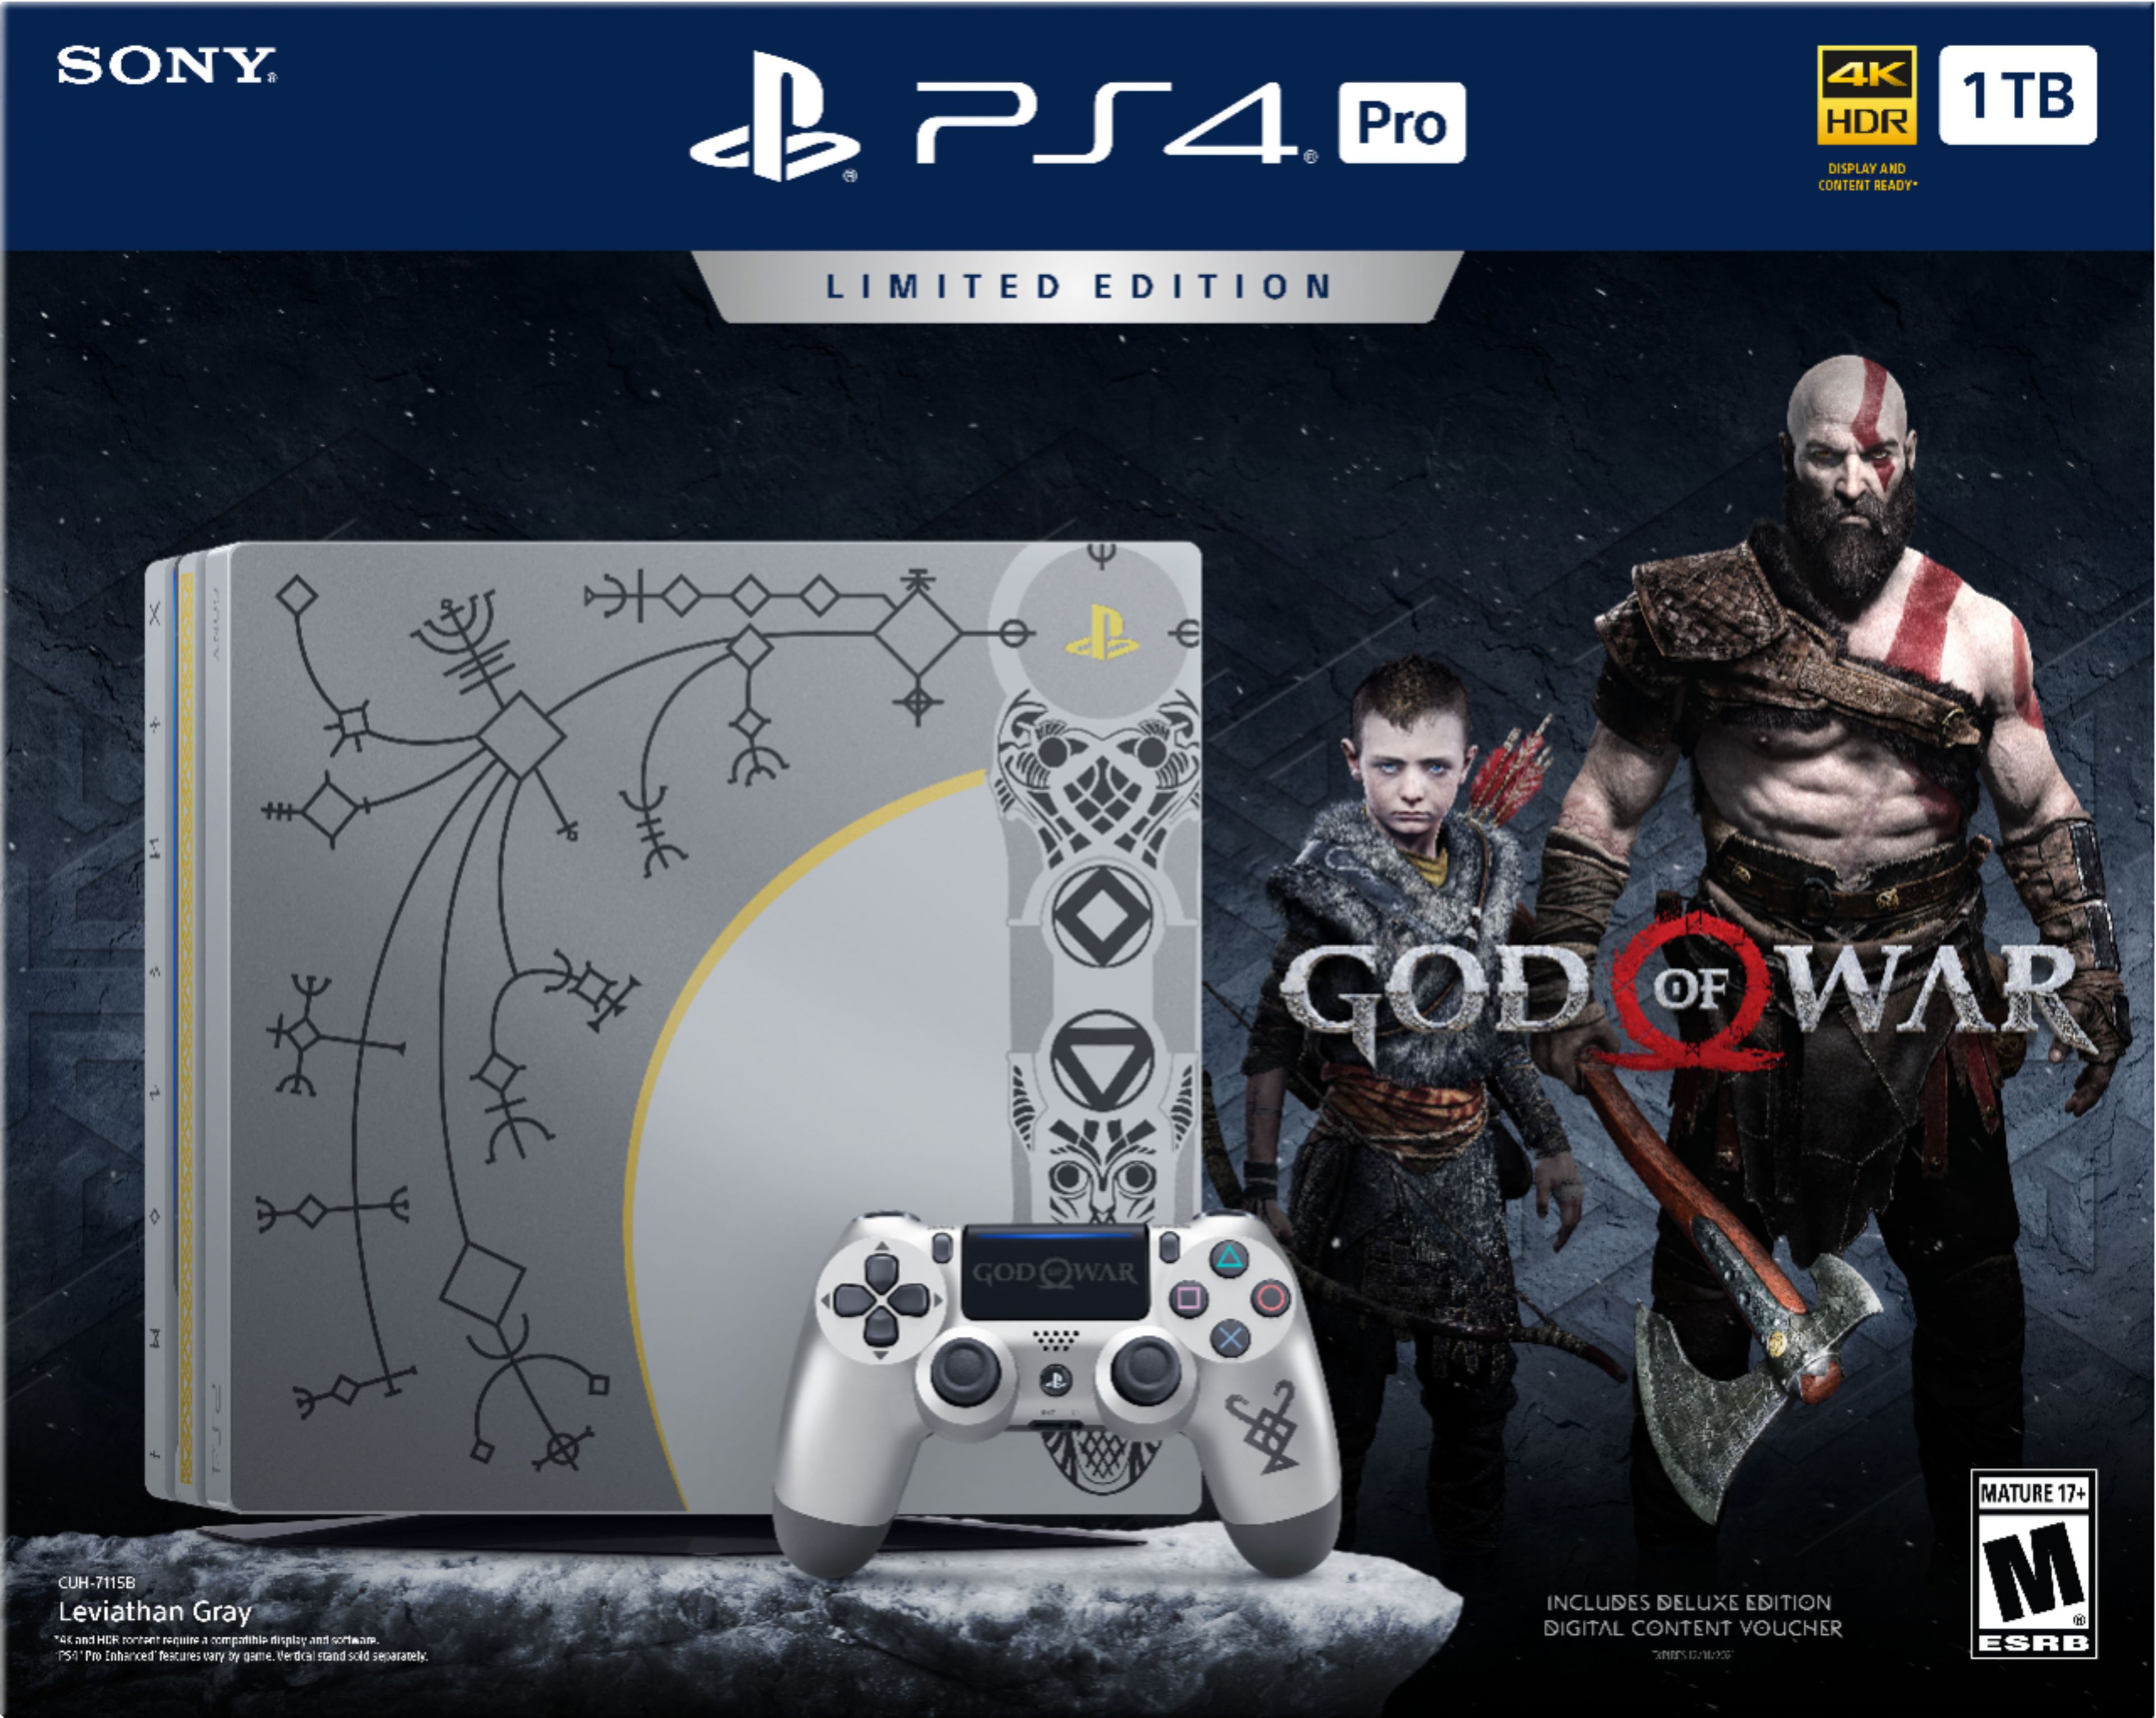 Sony PlayStation 4 Pro 1TB Limited Edition Console - God of War